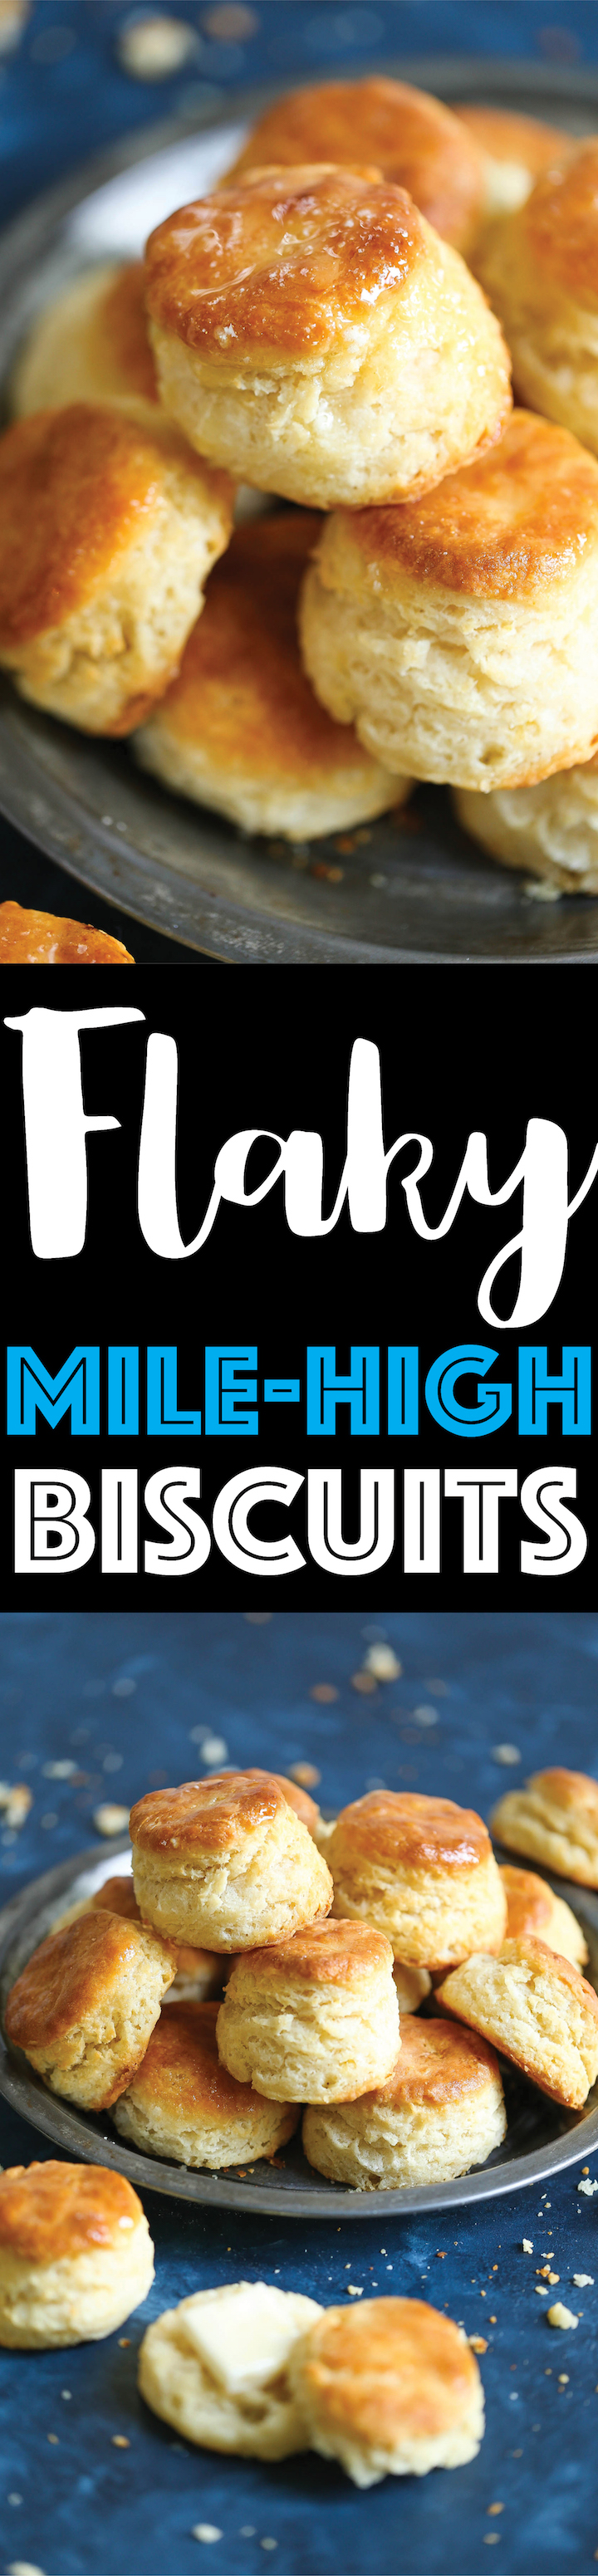 Flaky Mile High Biscuits - Is there anything better than warm, hot-out-of-the-oven, mile high, flaky biscuits that just melts in your mouth? No, right? Because these are truly the best biscuits you will ever make right at home!